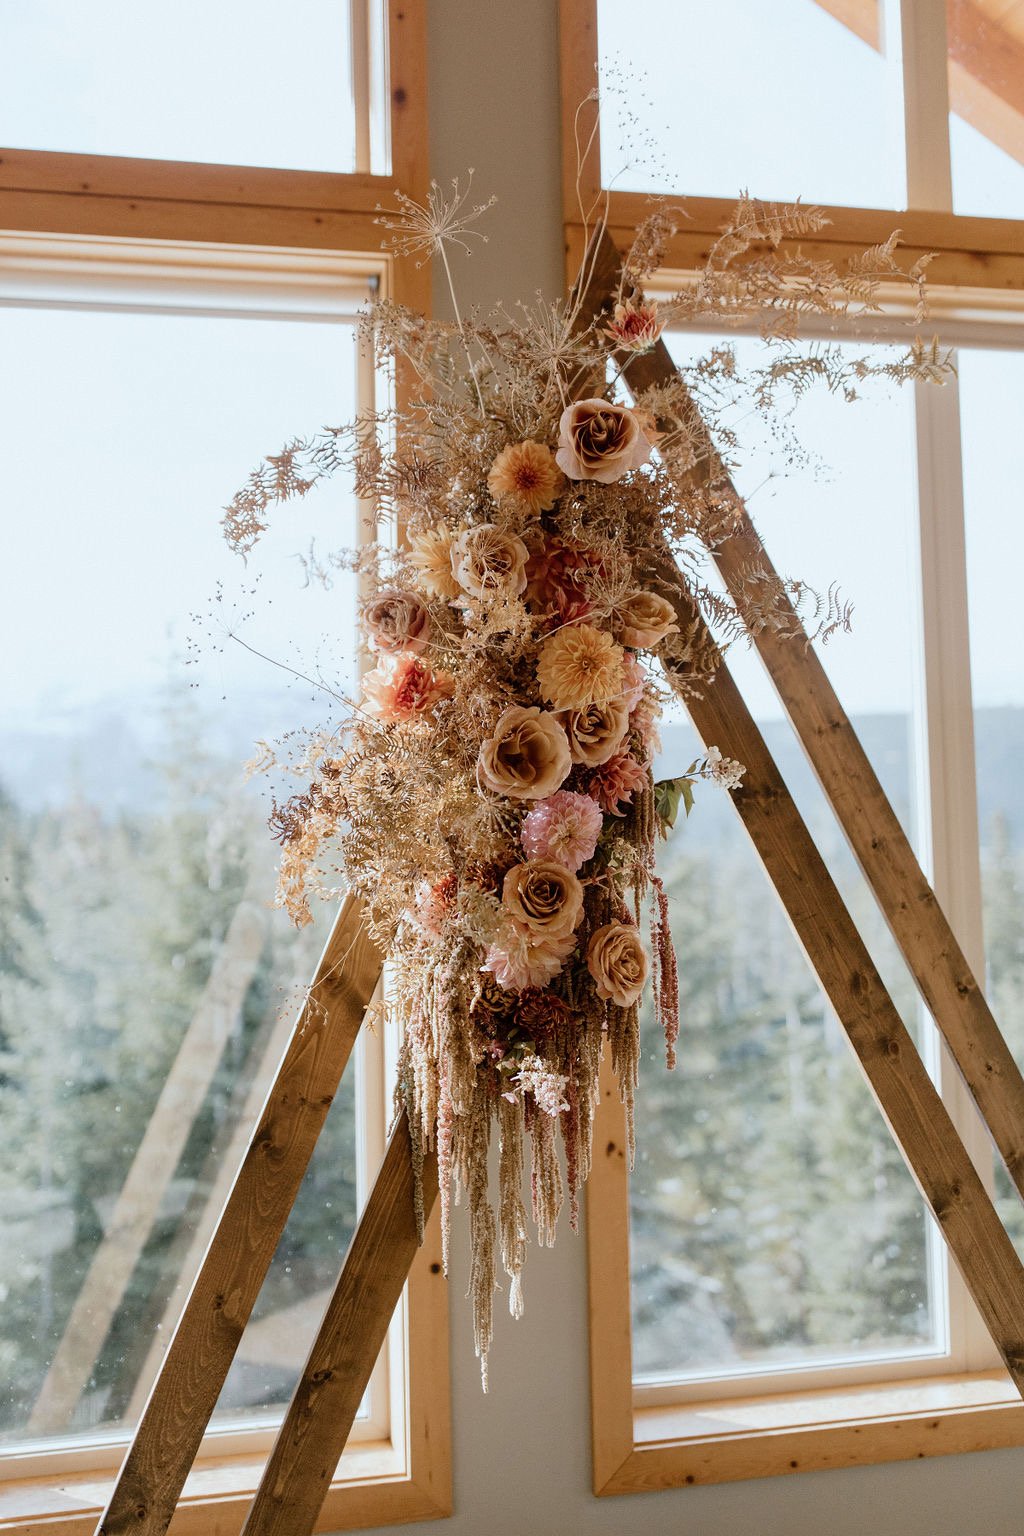 keep floral_vancouver island florist_farm to table flowers_ethical florals_discover our services_gallery 06.JPG